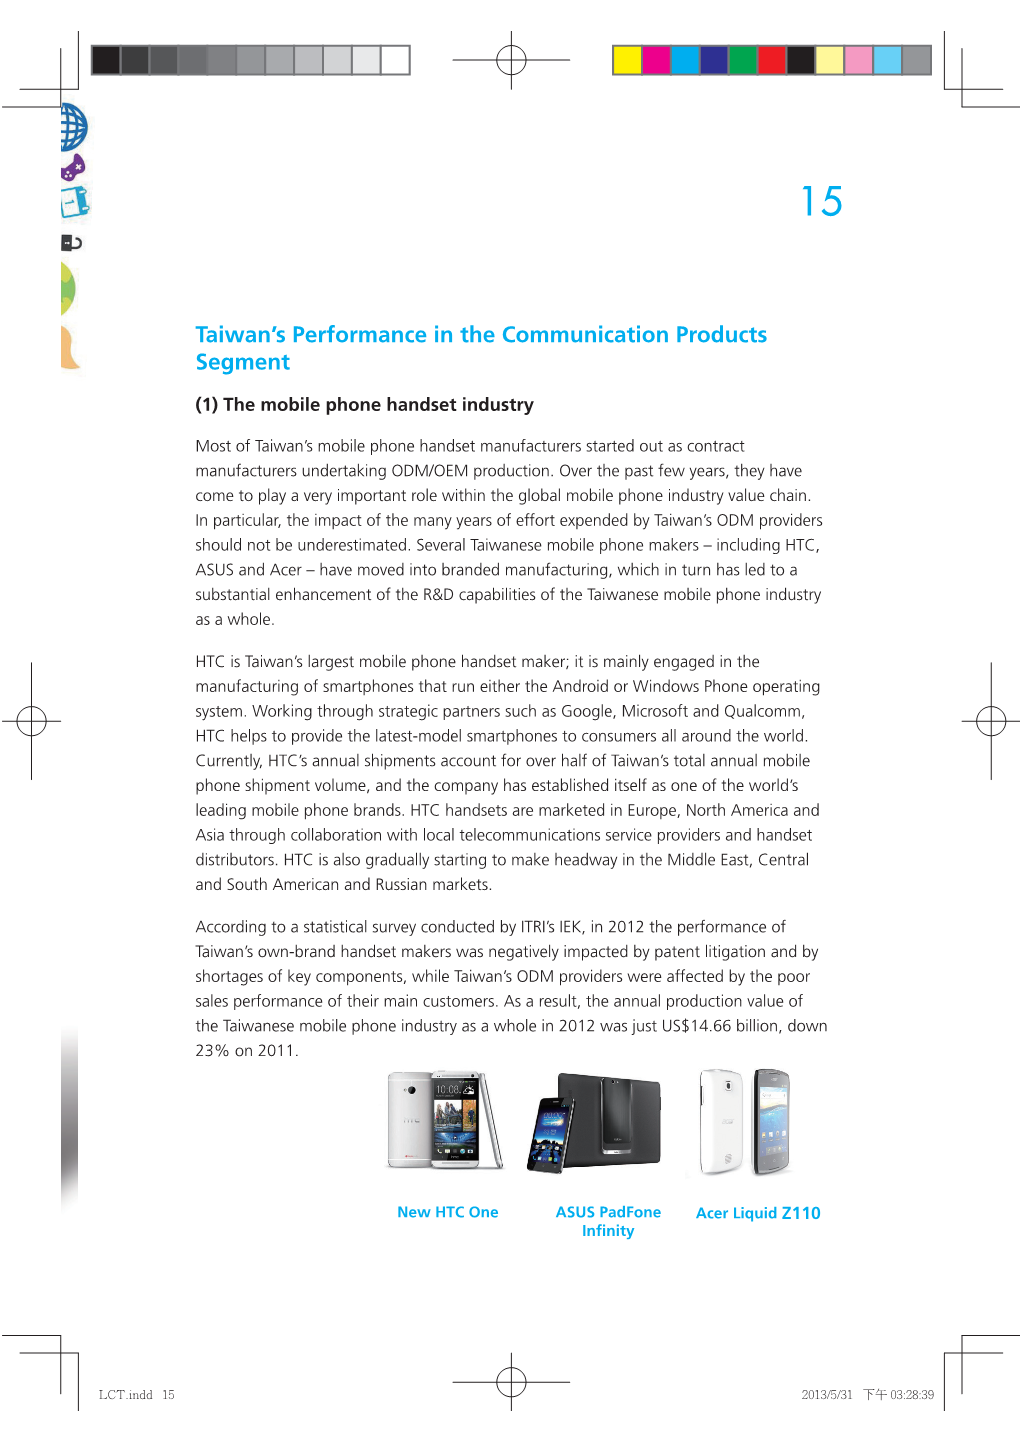 Taiwan's Performance in the Communication Products Segment